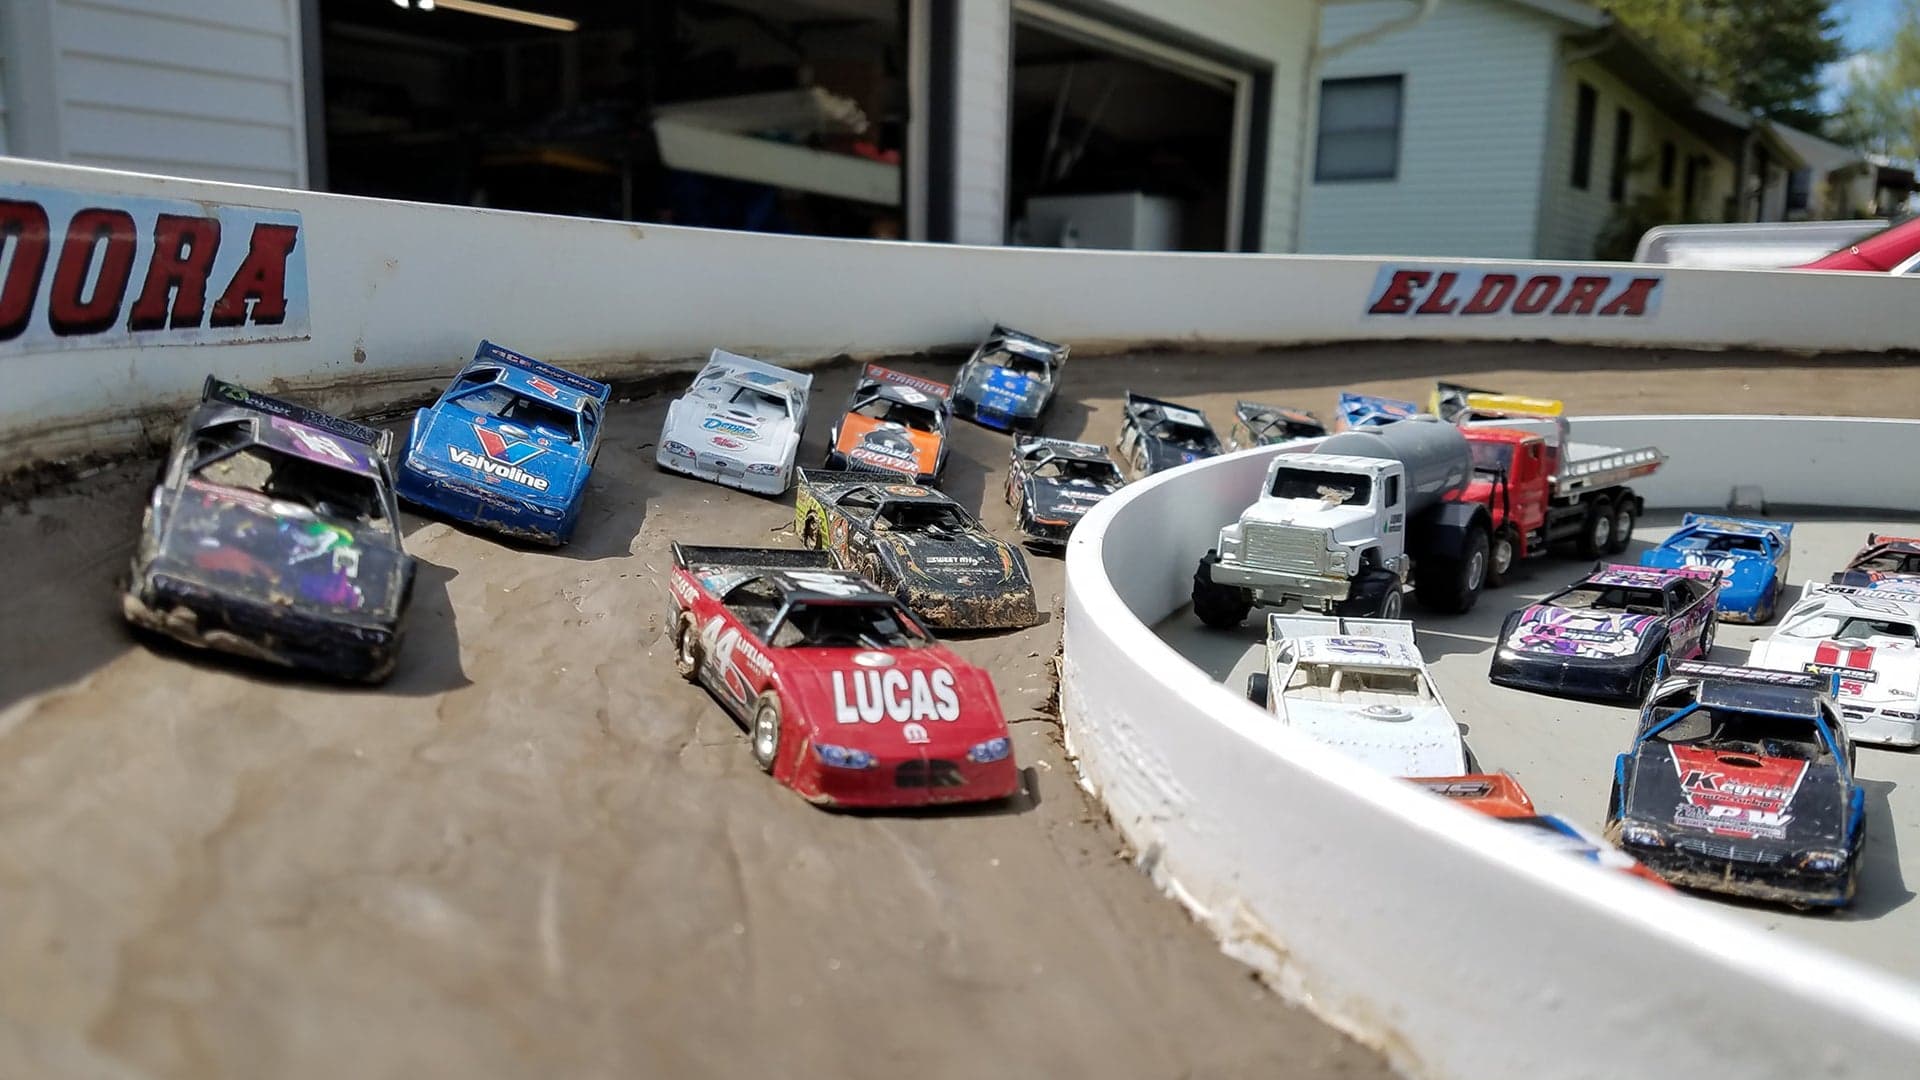 Father and Son Build Scale Model Eldora Speedway Because They Miss Racing